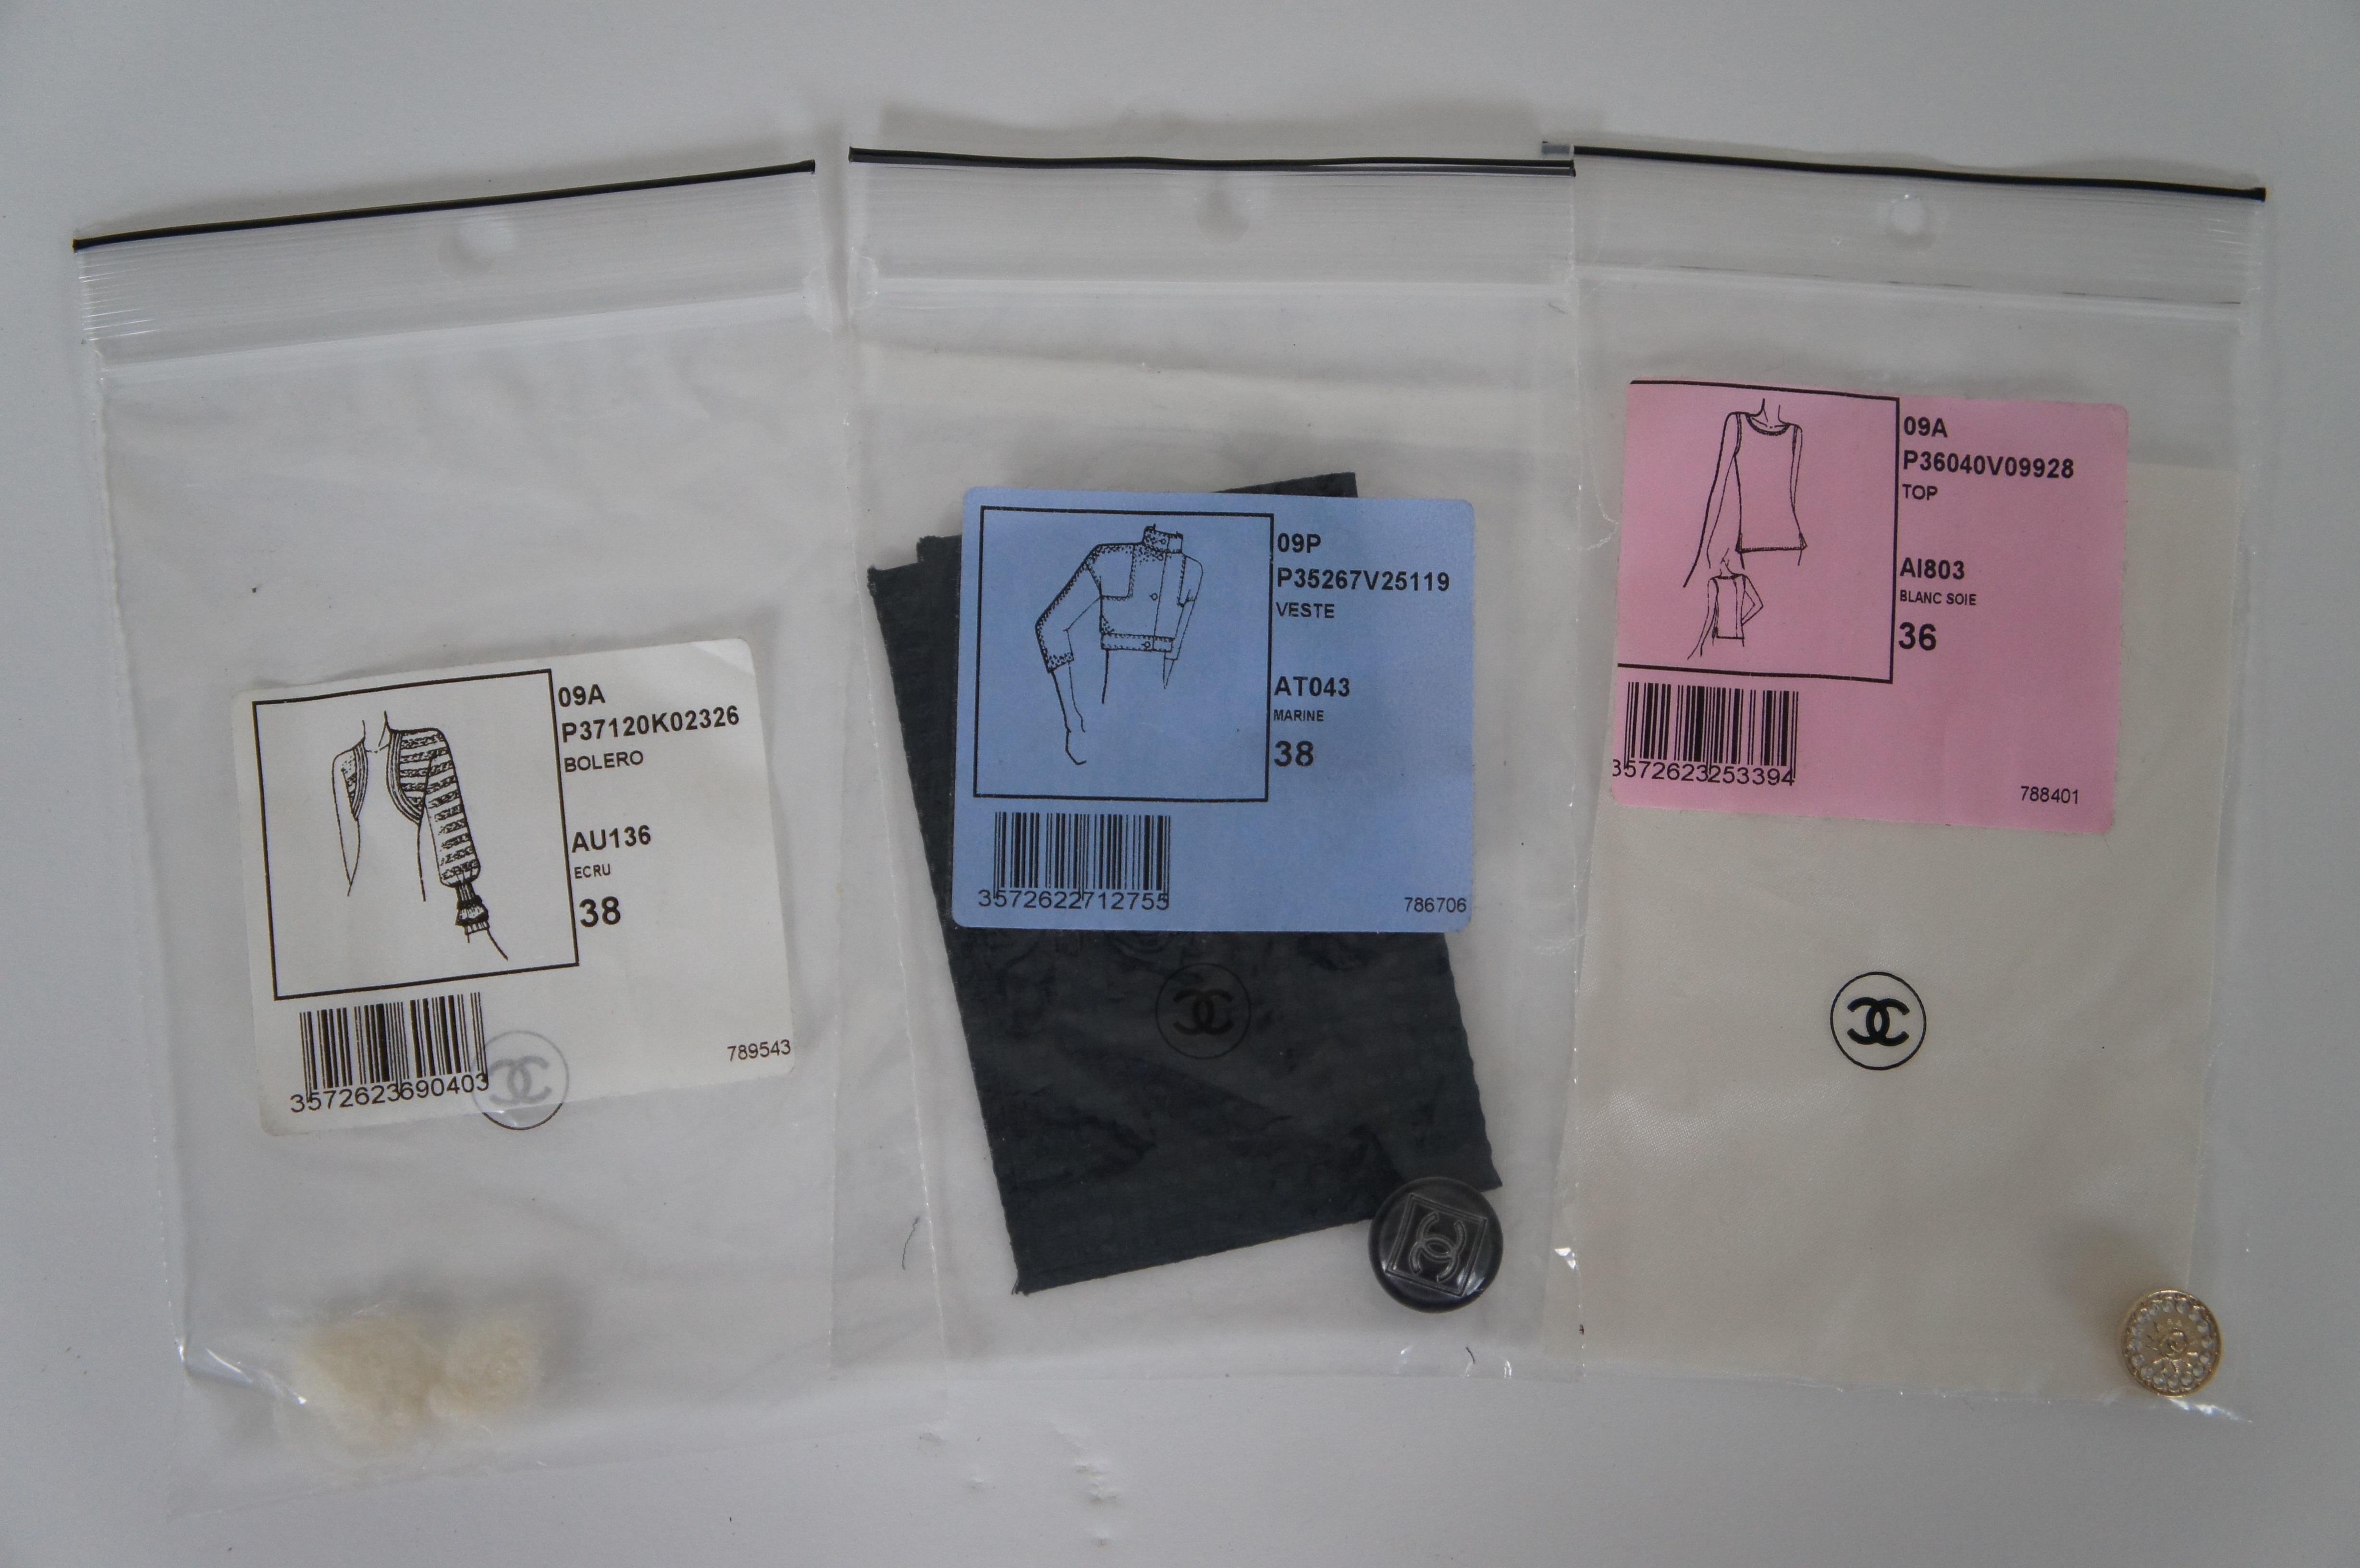 33 Spare Replacement Button Thread Swatch Fabric Heel Tips Chanel Prada In Excellent Condition For Sale In Dayton, OH